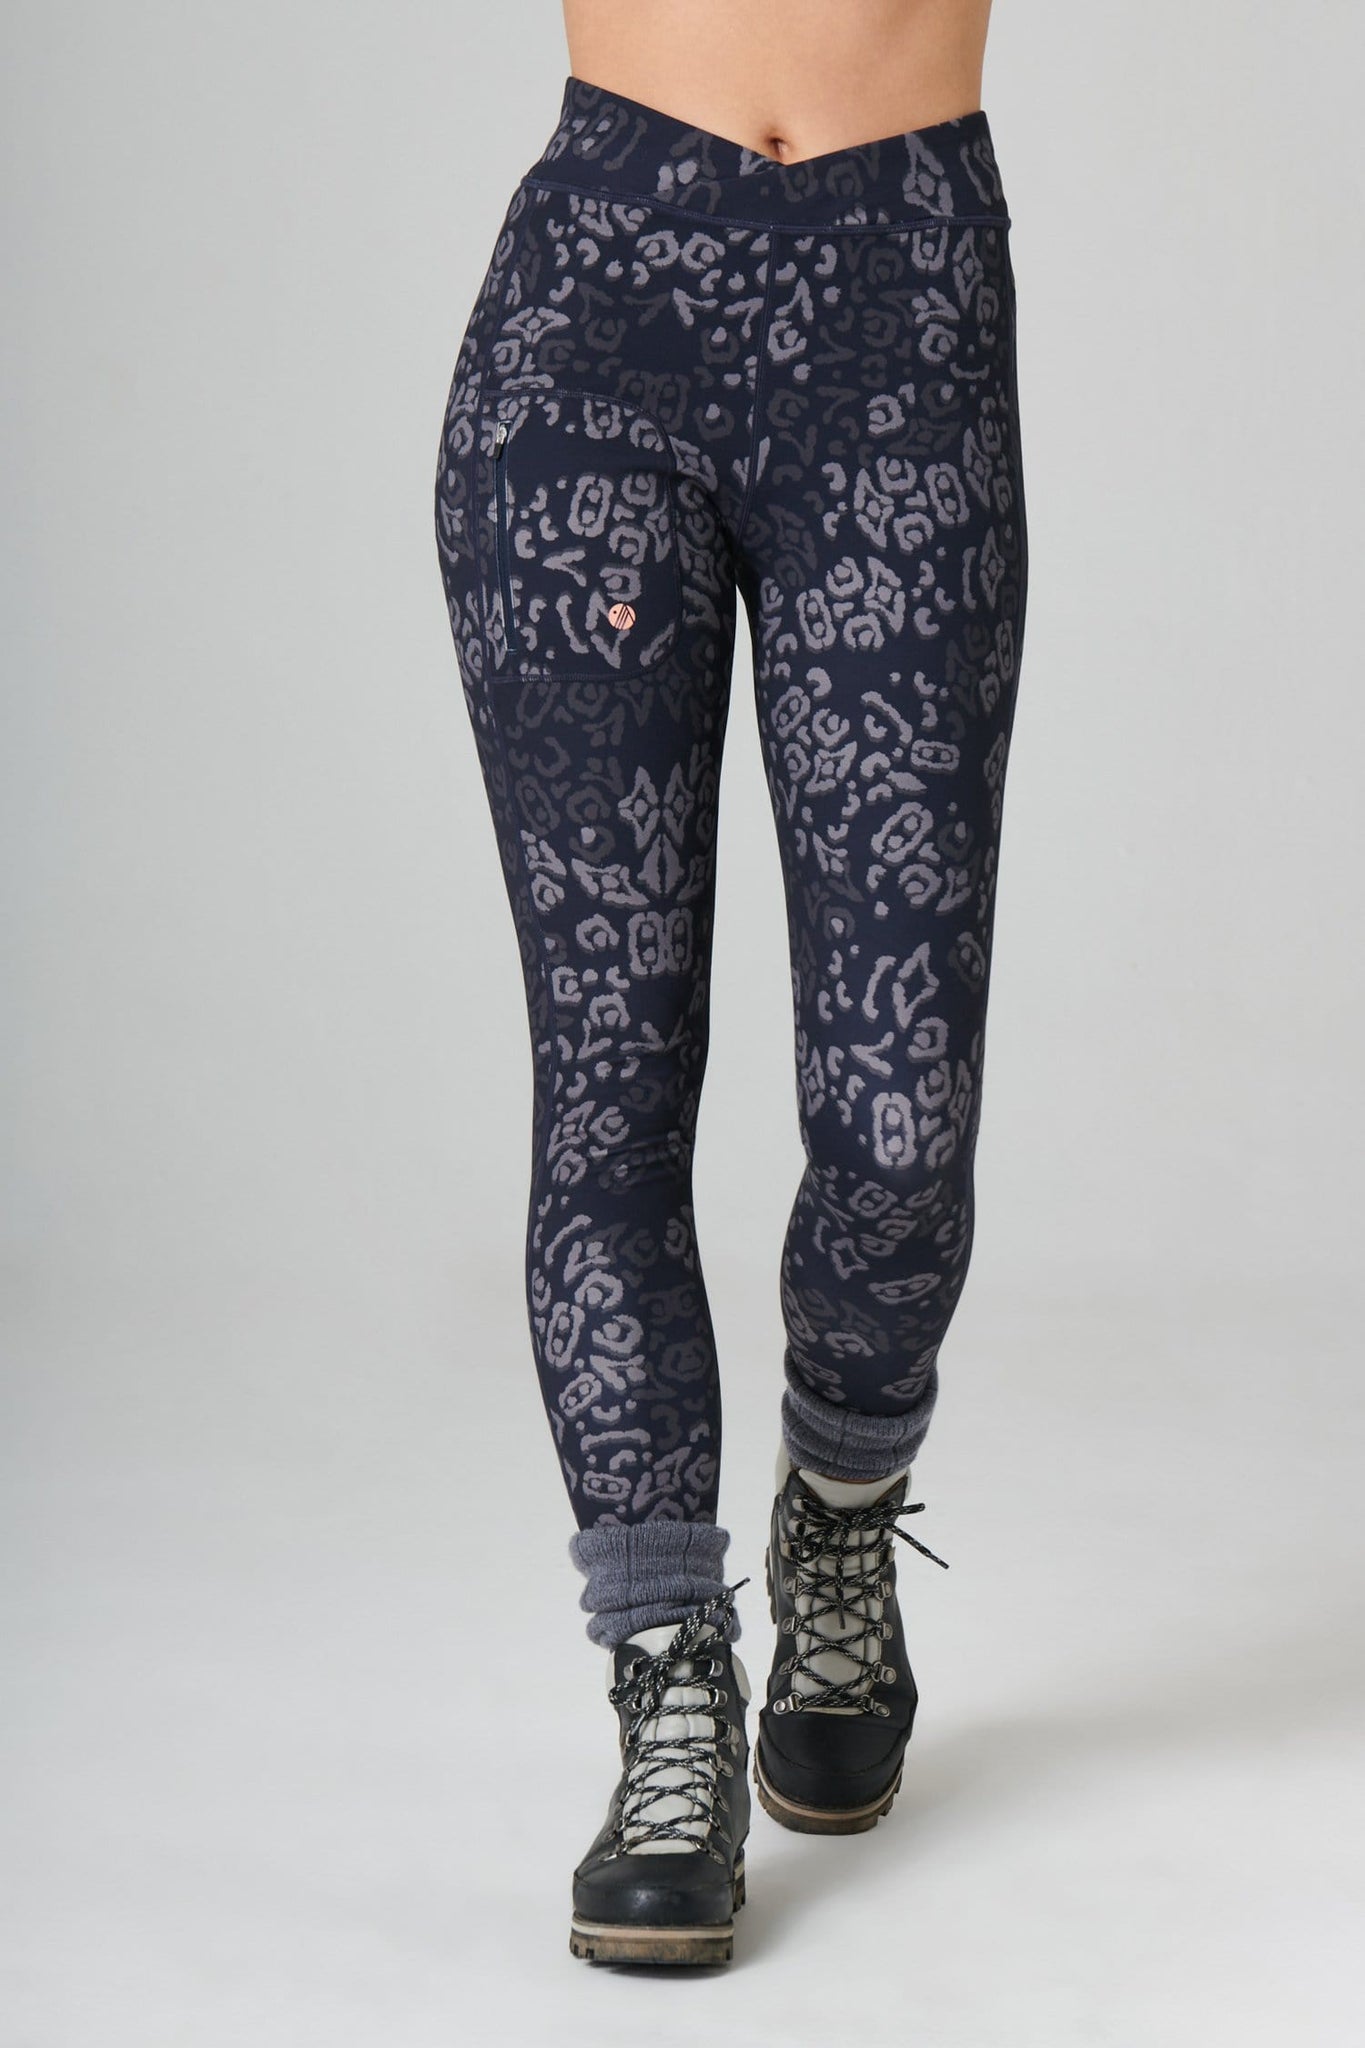 The Recycled Outdoor Leggings - Navy Wild Print